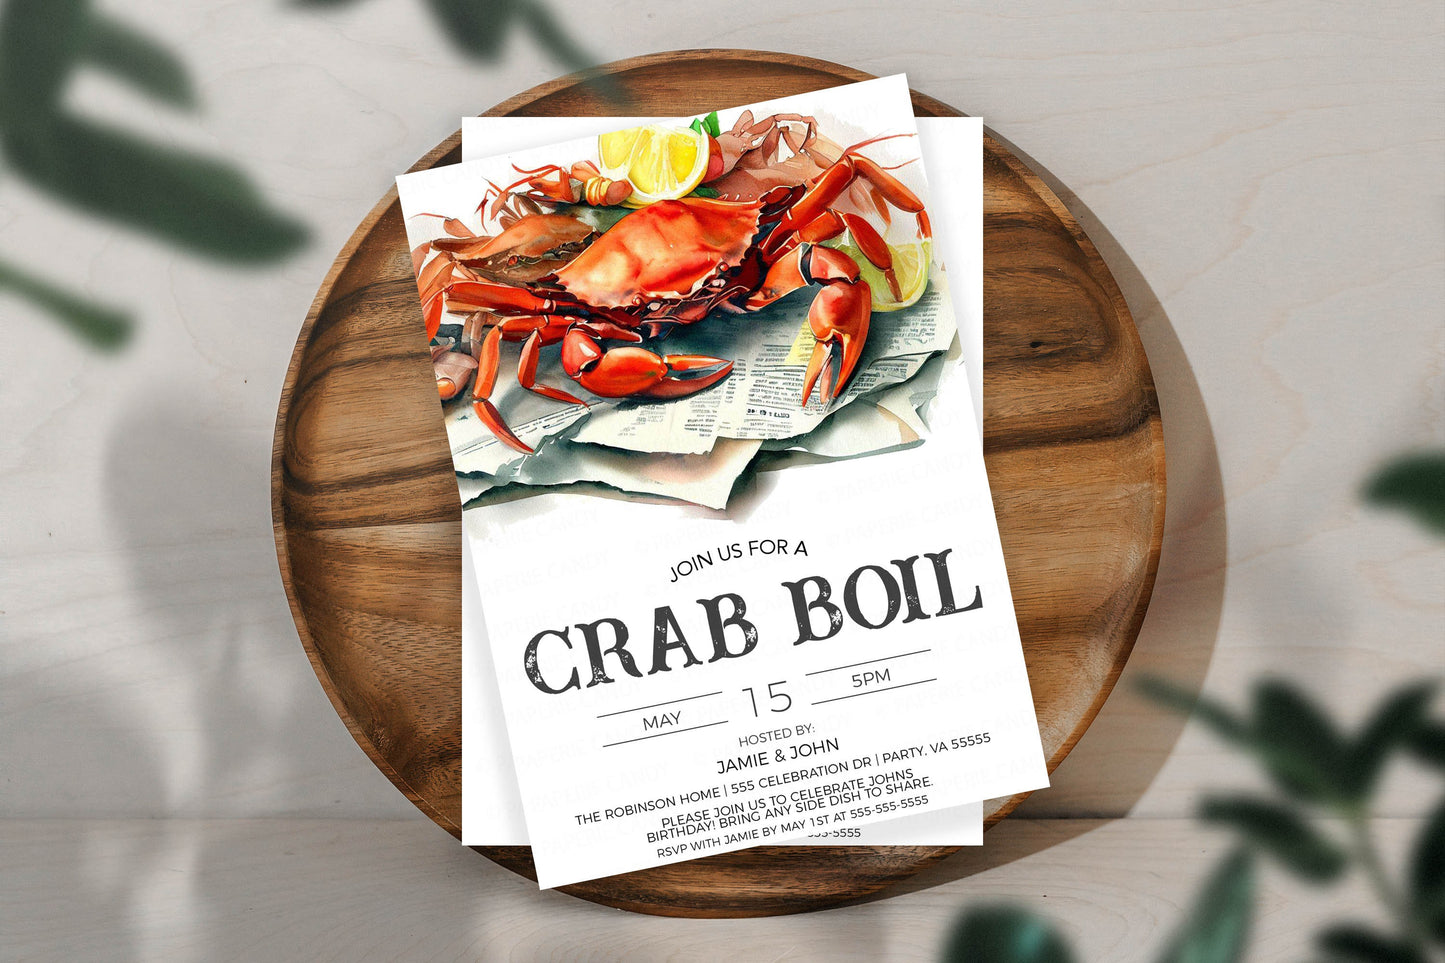 Crab Boil Invitation, Crab Boil Invite, Crab Boil Birthday, Crab Beer Boil Party, Boiled Crab Fundraiser, Editable Printable Template